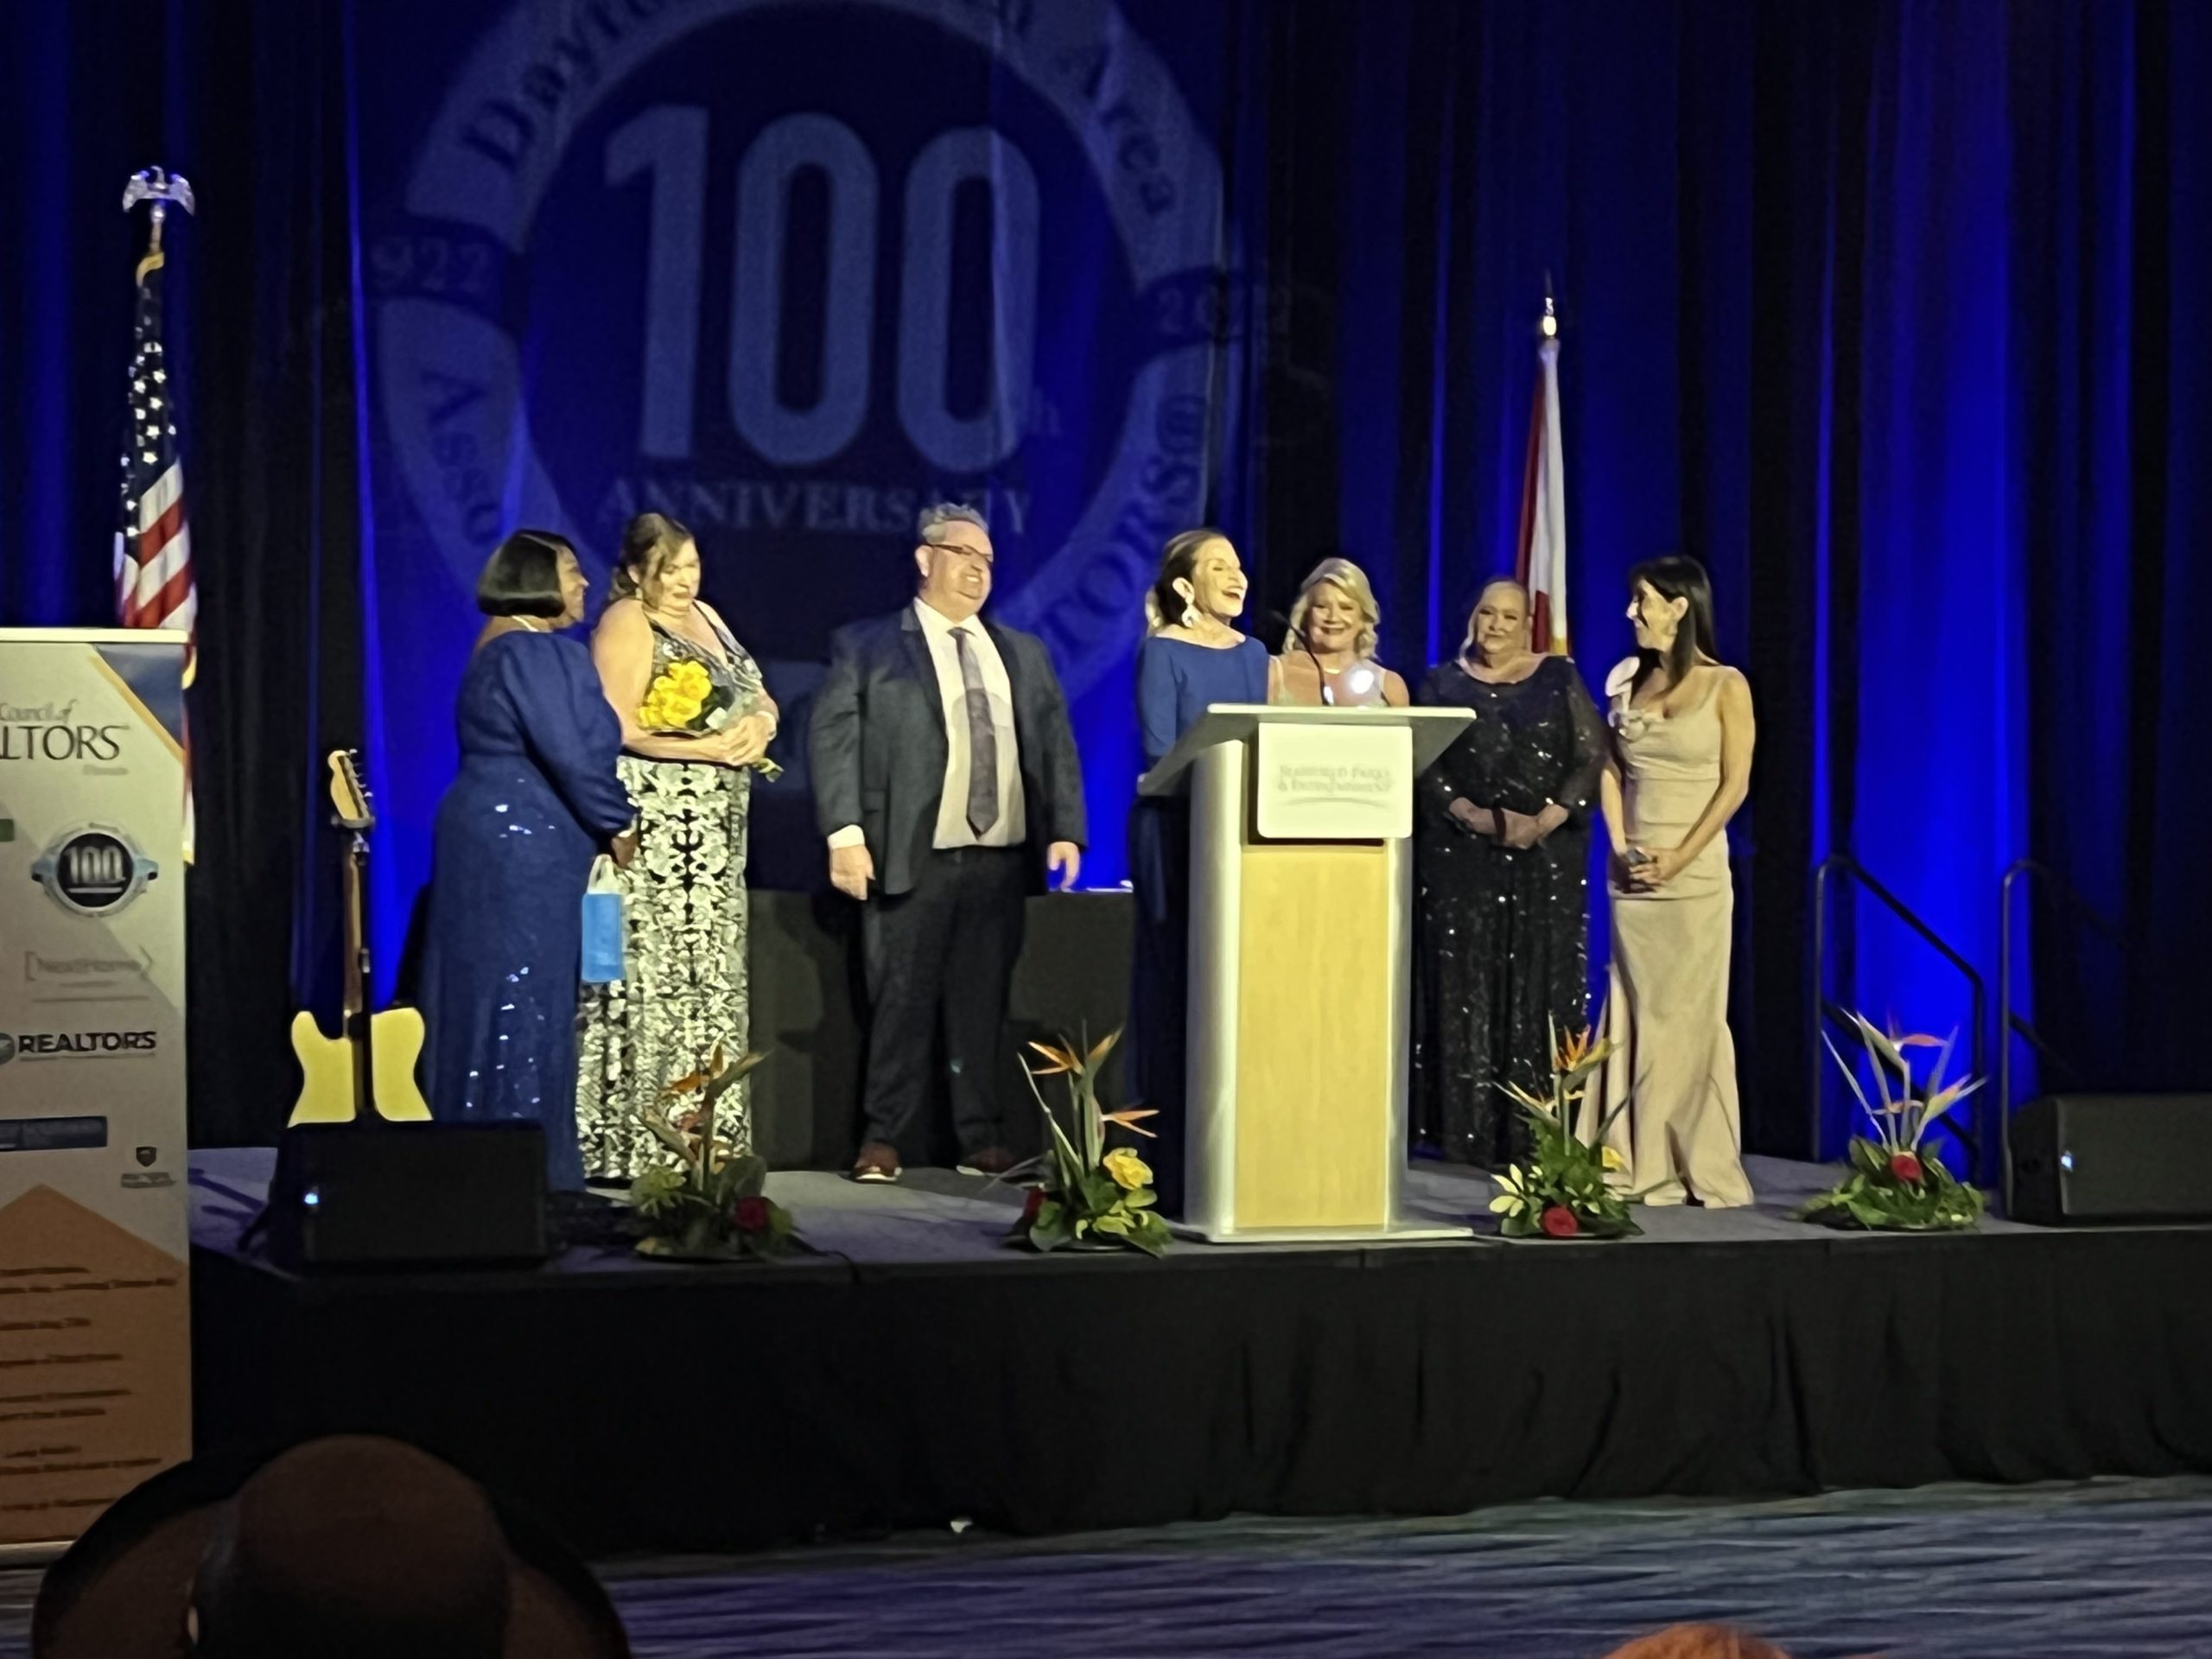 Dinorah Guerra gets installed as First Vice-President of Women’s Council of Realtors for the State of Florida